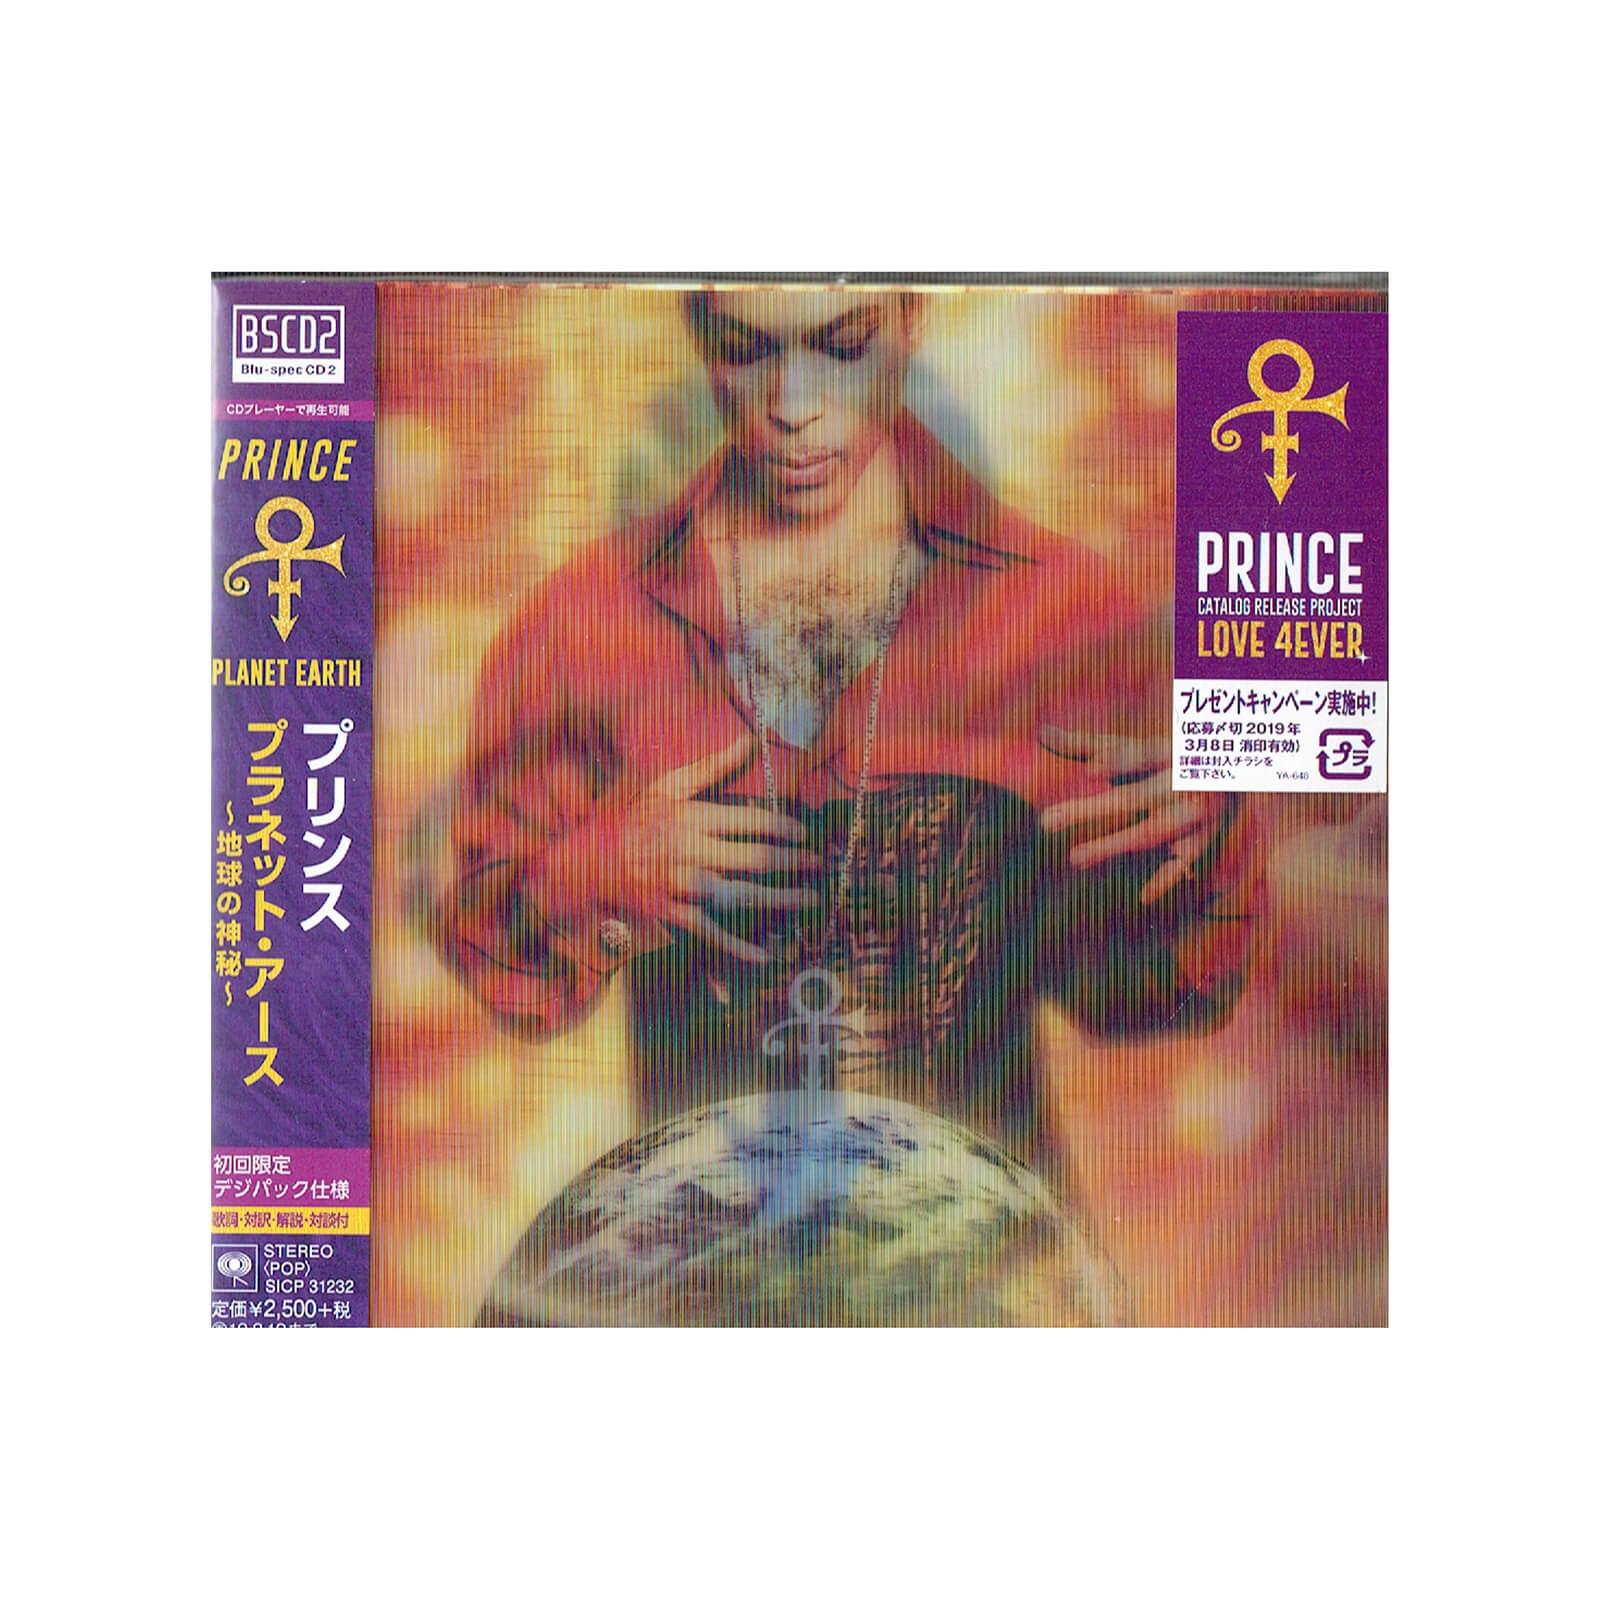 Prince - Planet Earth LP Japanese Edition